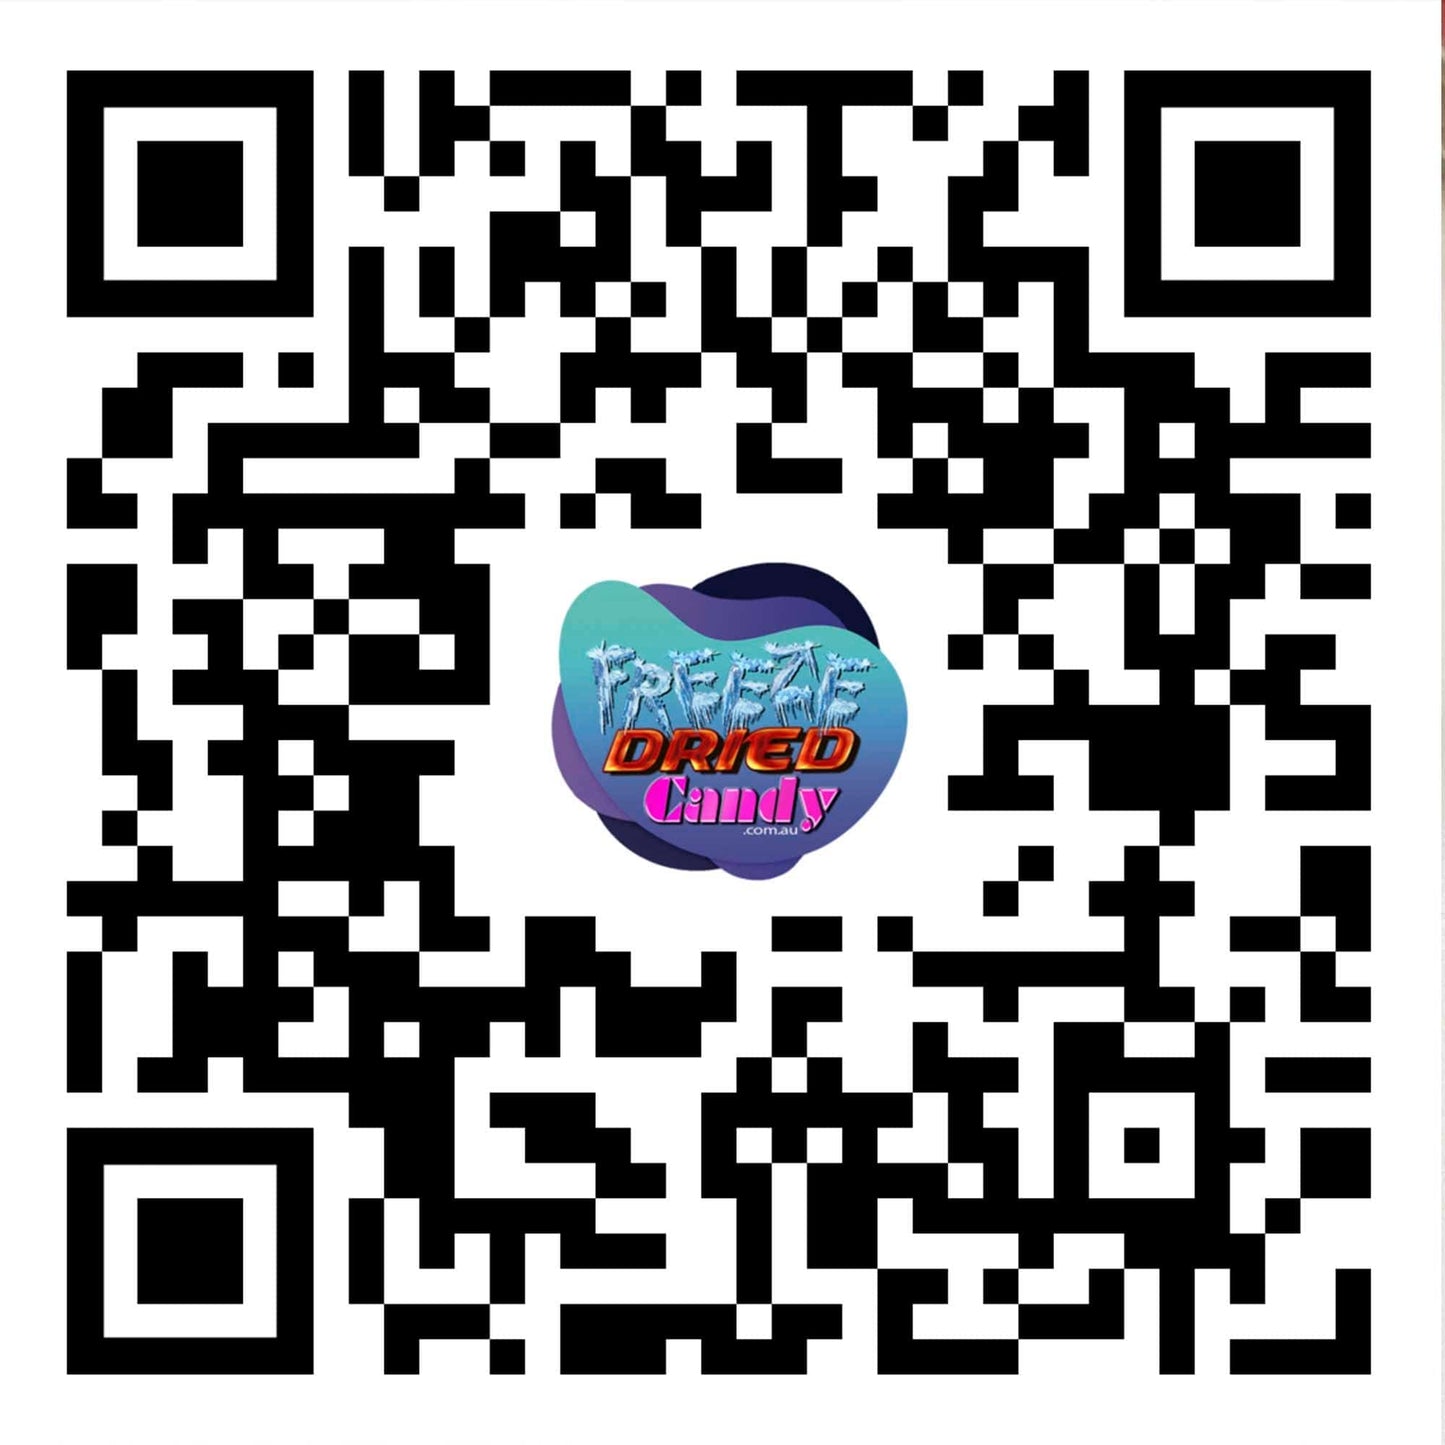 QR Code Find Us on the internet, Freeze Dried Candy Lollies Sweets Ice cream and treats